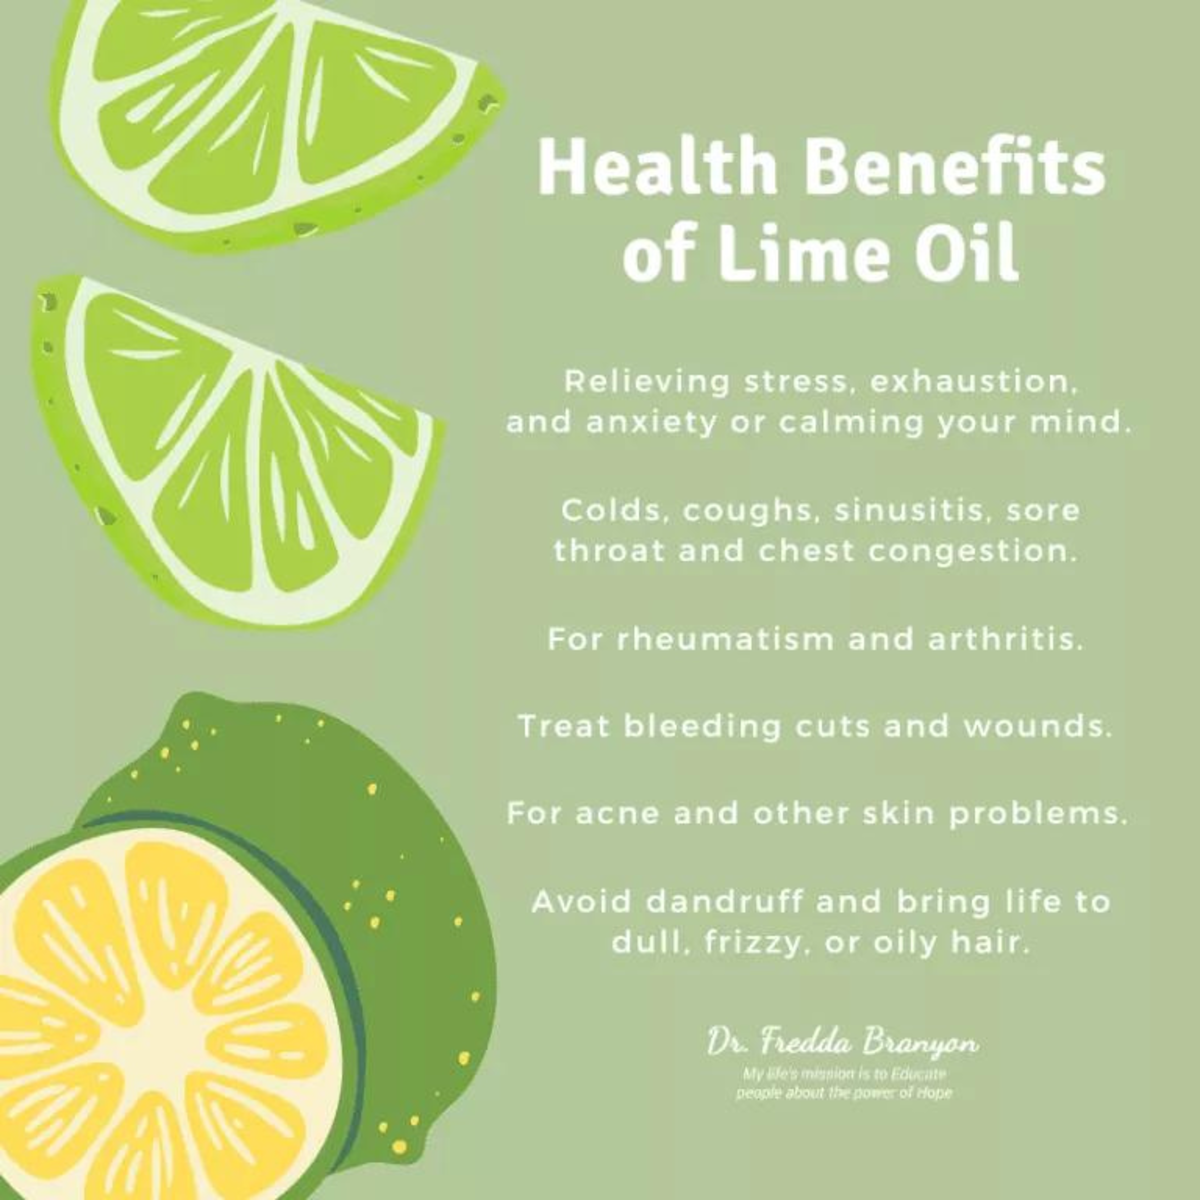 What Are the Benefits and Uses of Lime Oil?